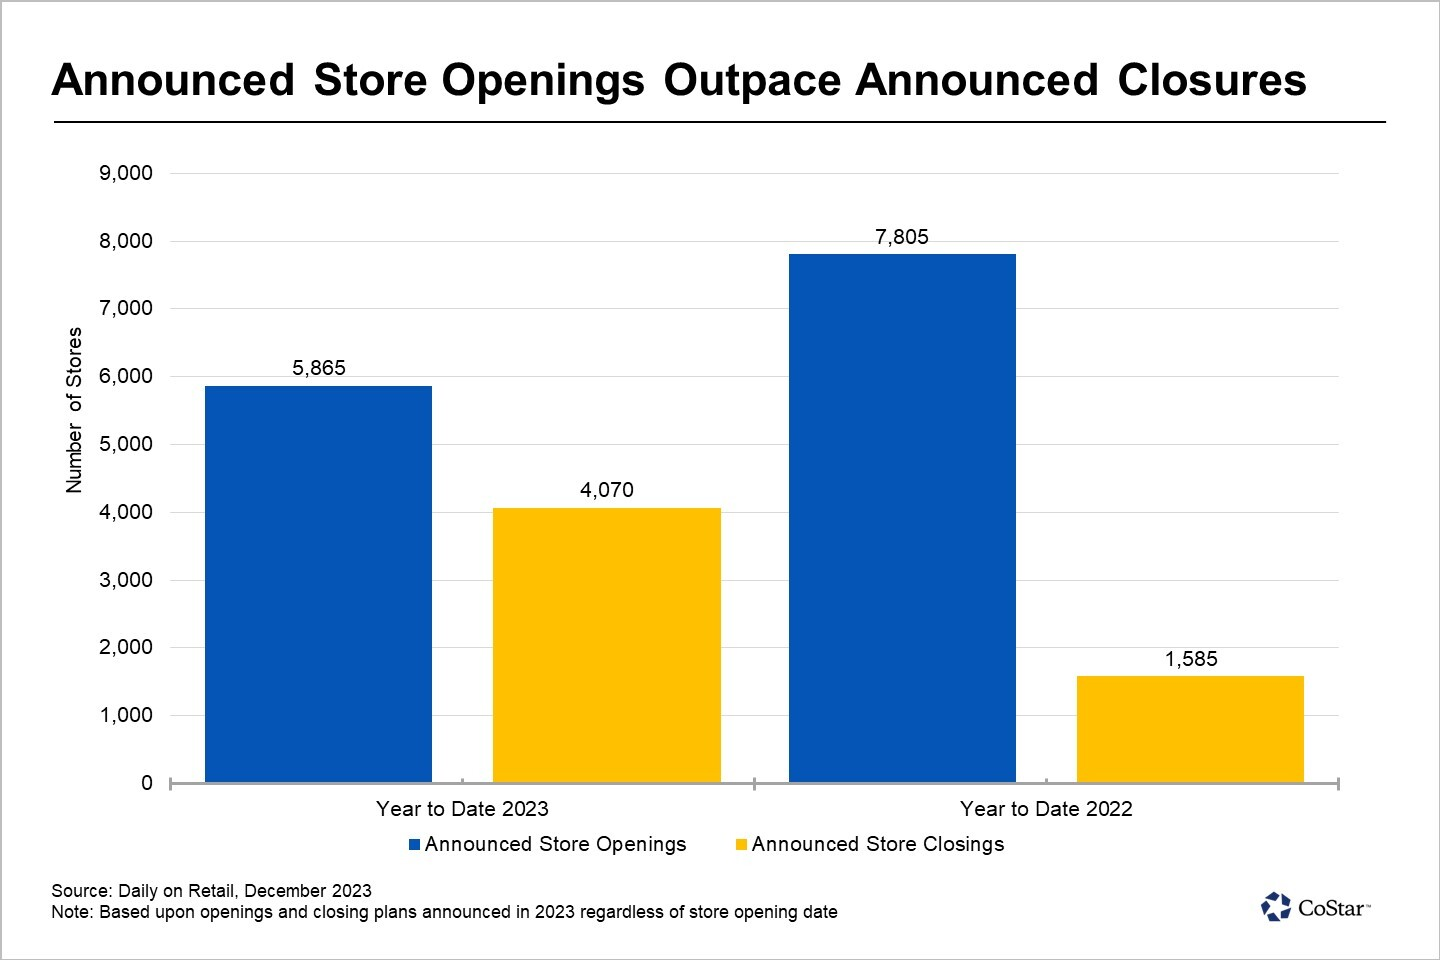 Retailers Announce More Store Openings Than Closings in 2023